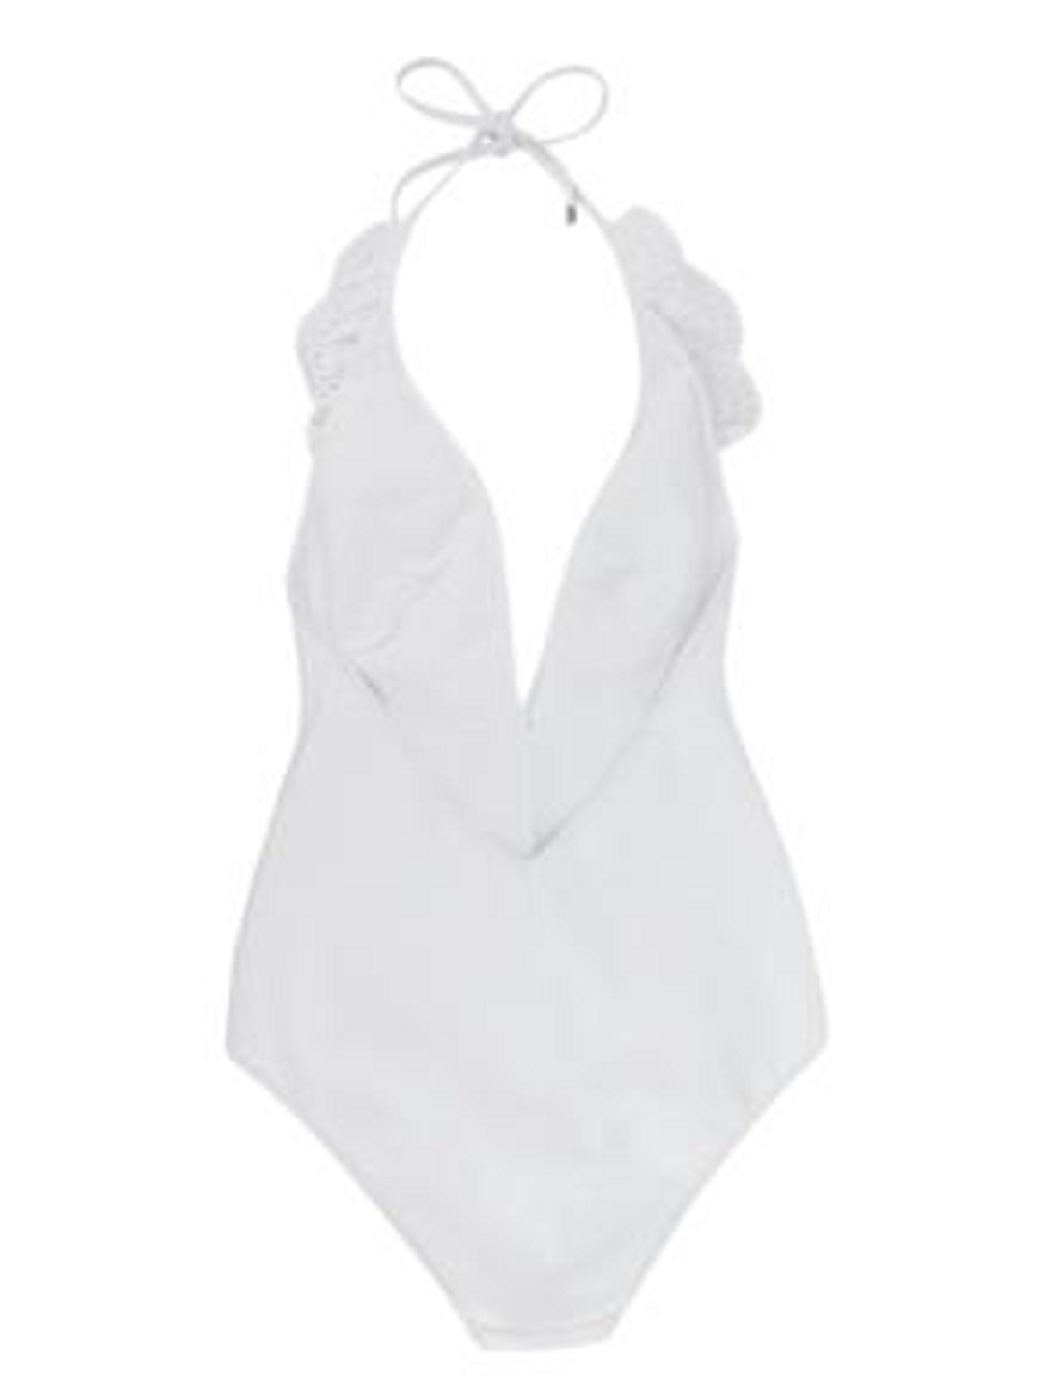 Zimmermann White Broderie Anglaise-Trimmed Swimsuit

- Plunge-front with halterneck tie
- Deep cut-out back
- Plunge front trimmed with Broderie Anglaise
-Fully Lined 

Materials 
72% Polyamide 
28 % Elastane 
Lining
90 % Polyamide 
10 % Elastane